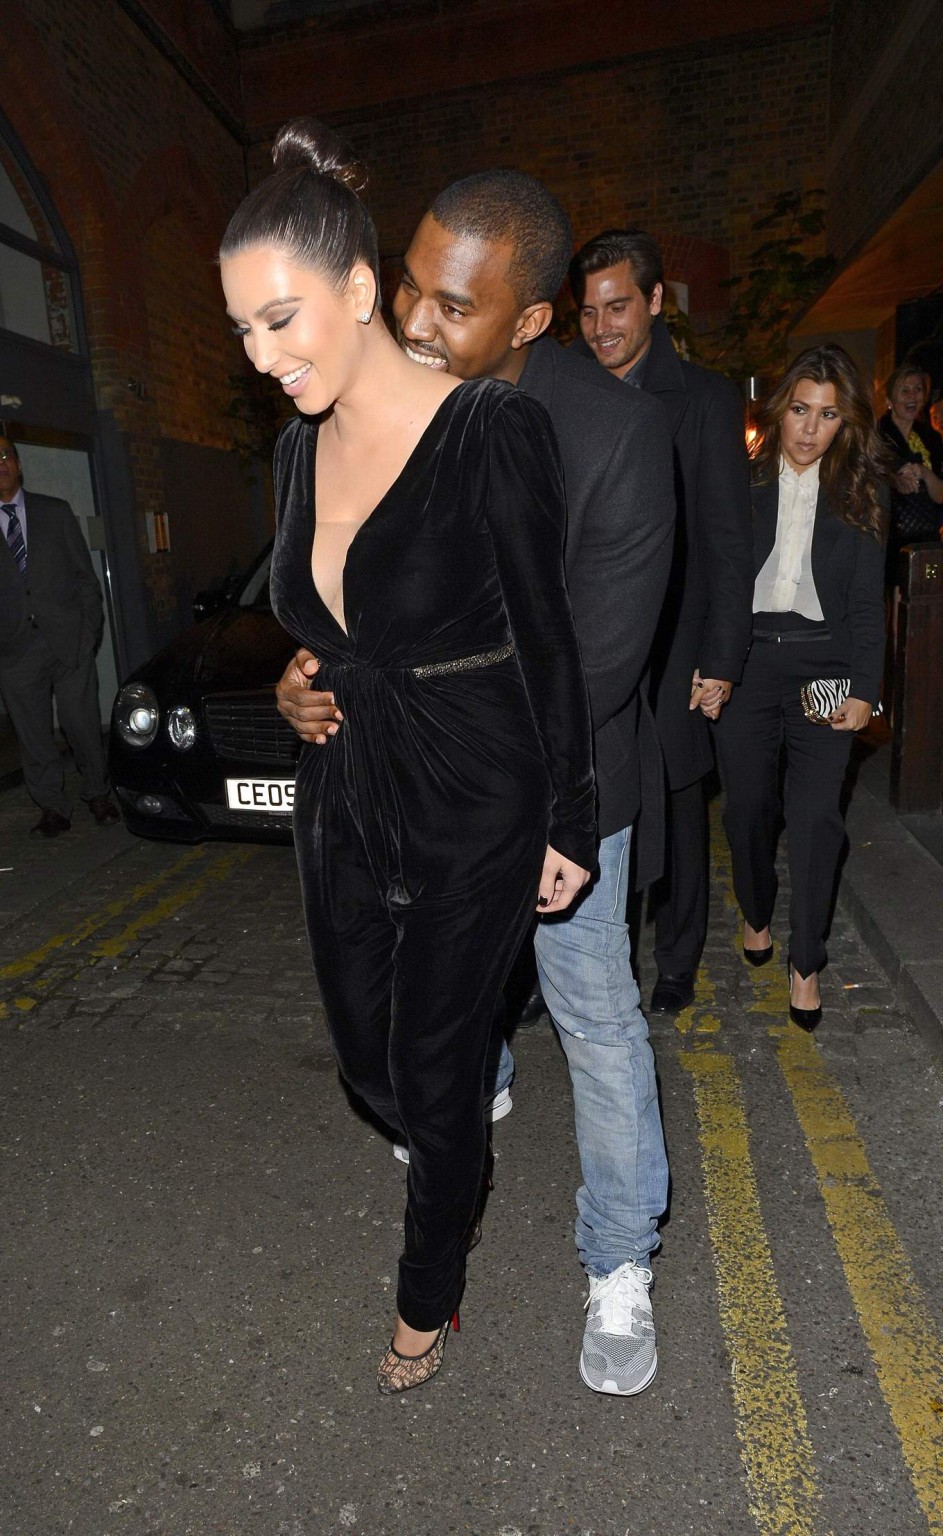 Kim Kardashian shows cleavage  pokies wearing a sexy black outfit outside a rest #75248775